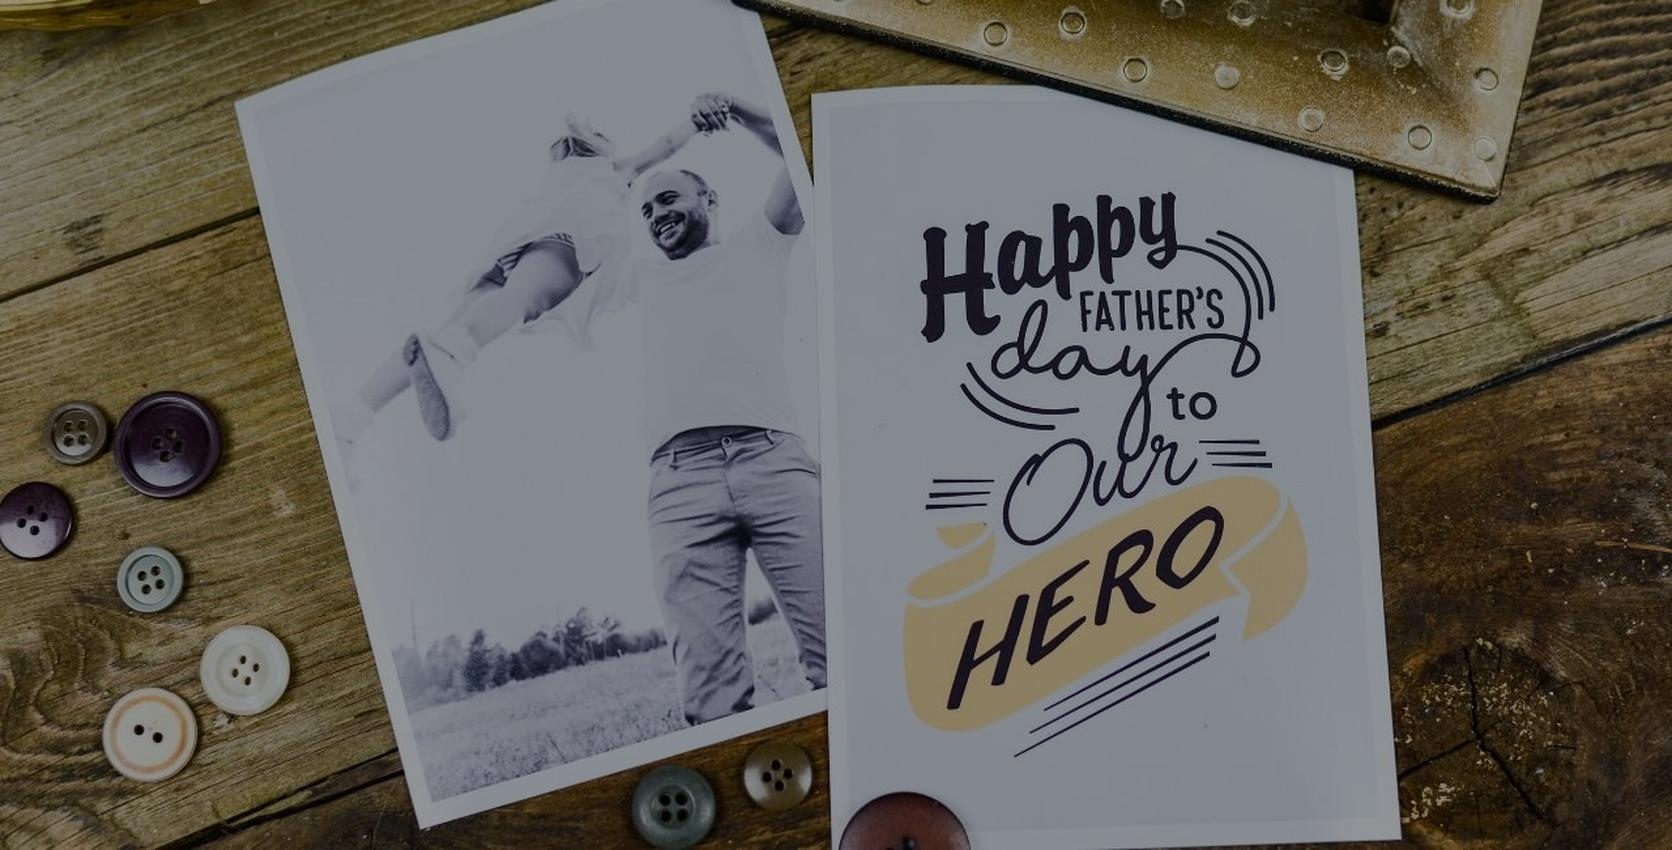 Inspiring Dads - Supporting Dads to Make Brave Decisions